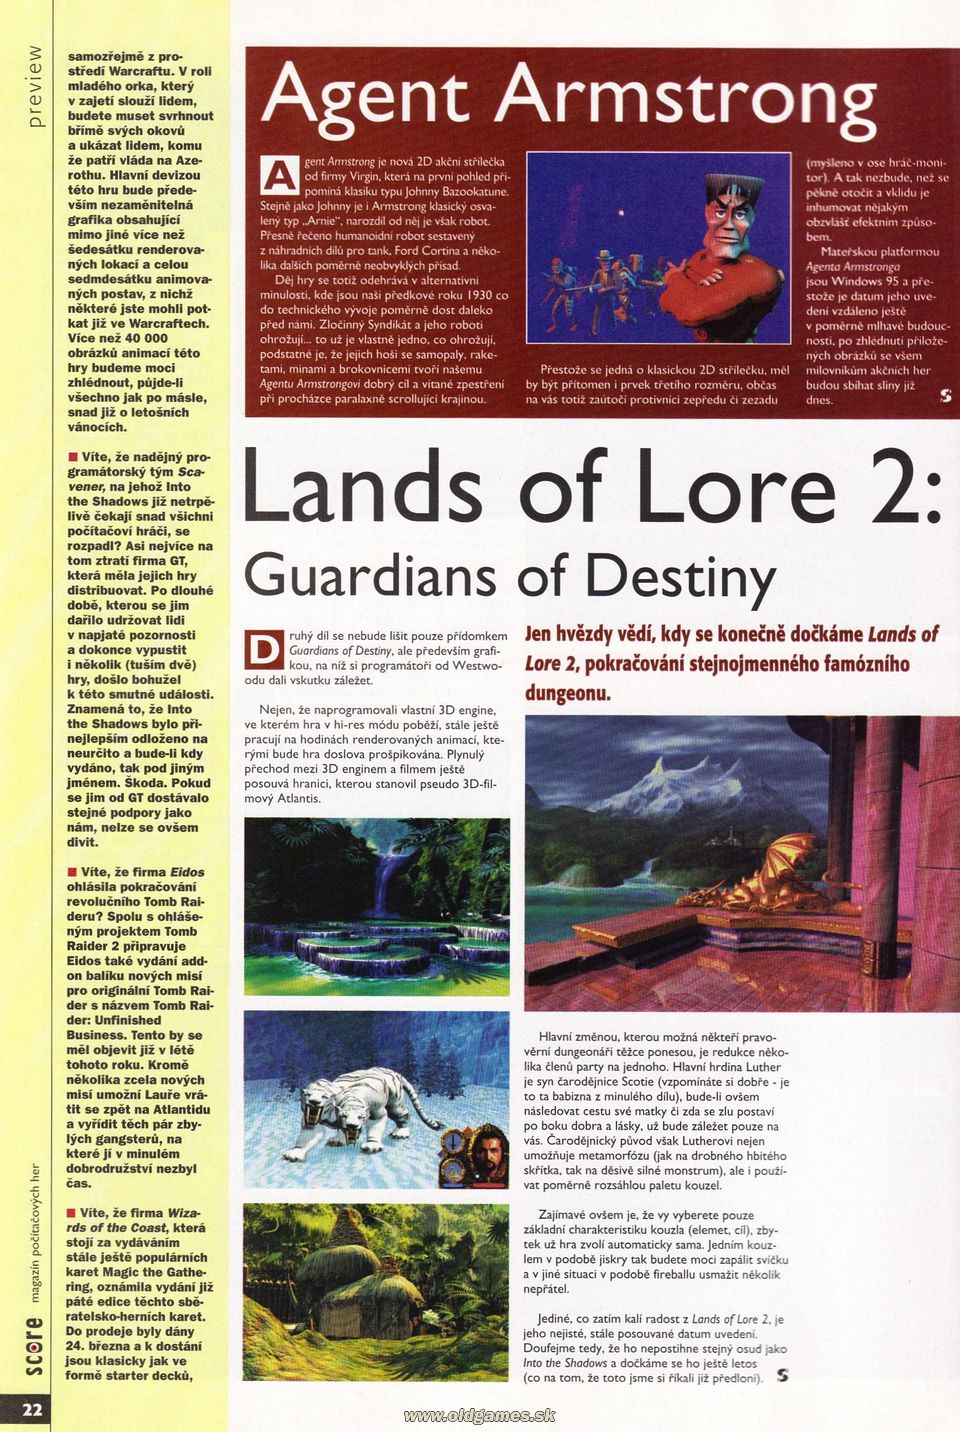 Preview: Lands of Lore 2, Agent Armstrong